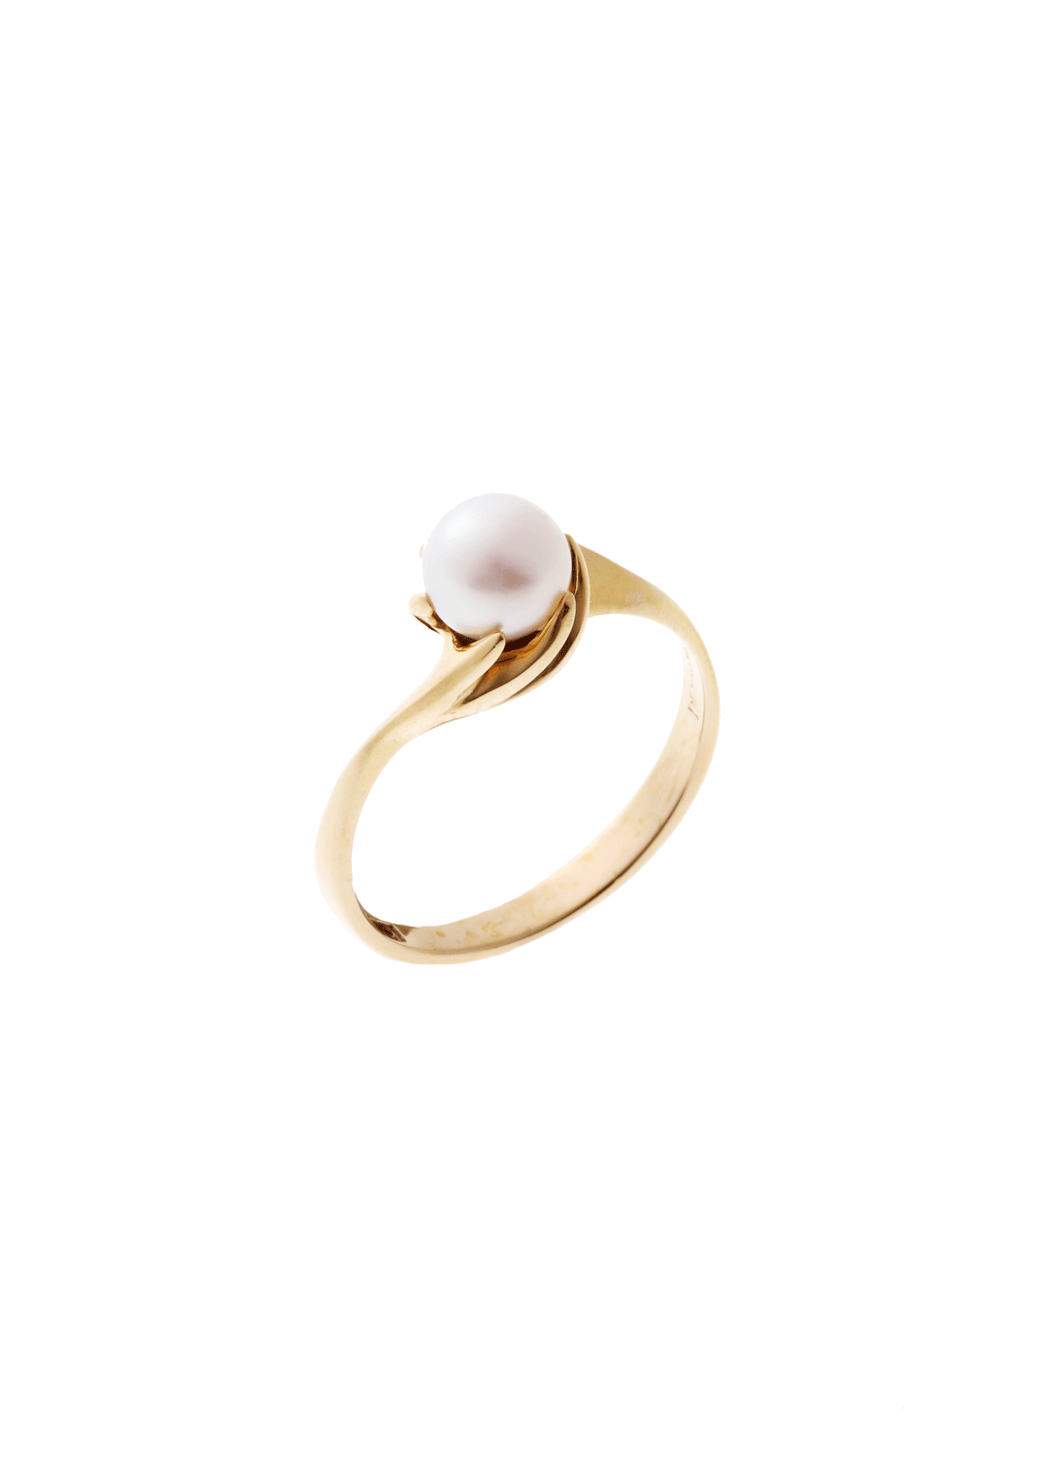 Lund Cph, ring with 5.5-6 mm pearl in 8 kt. gold (333)